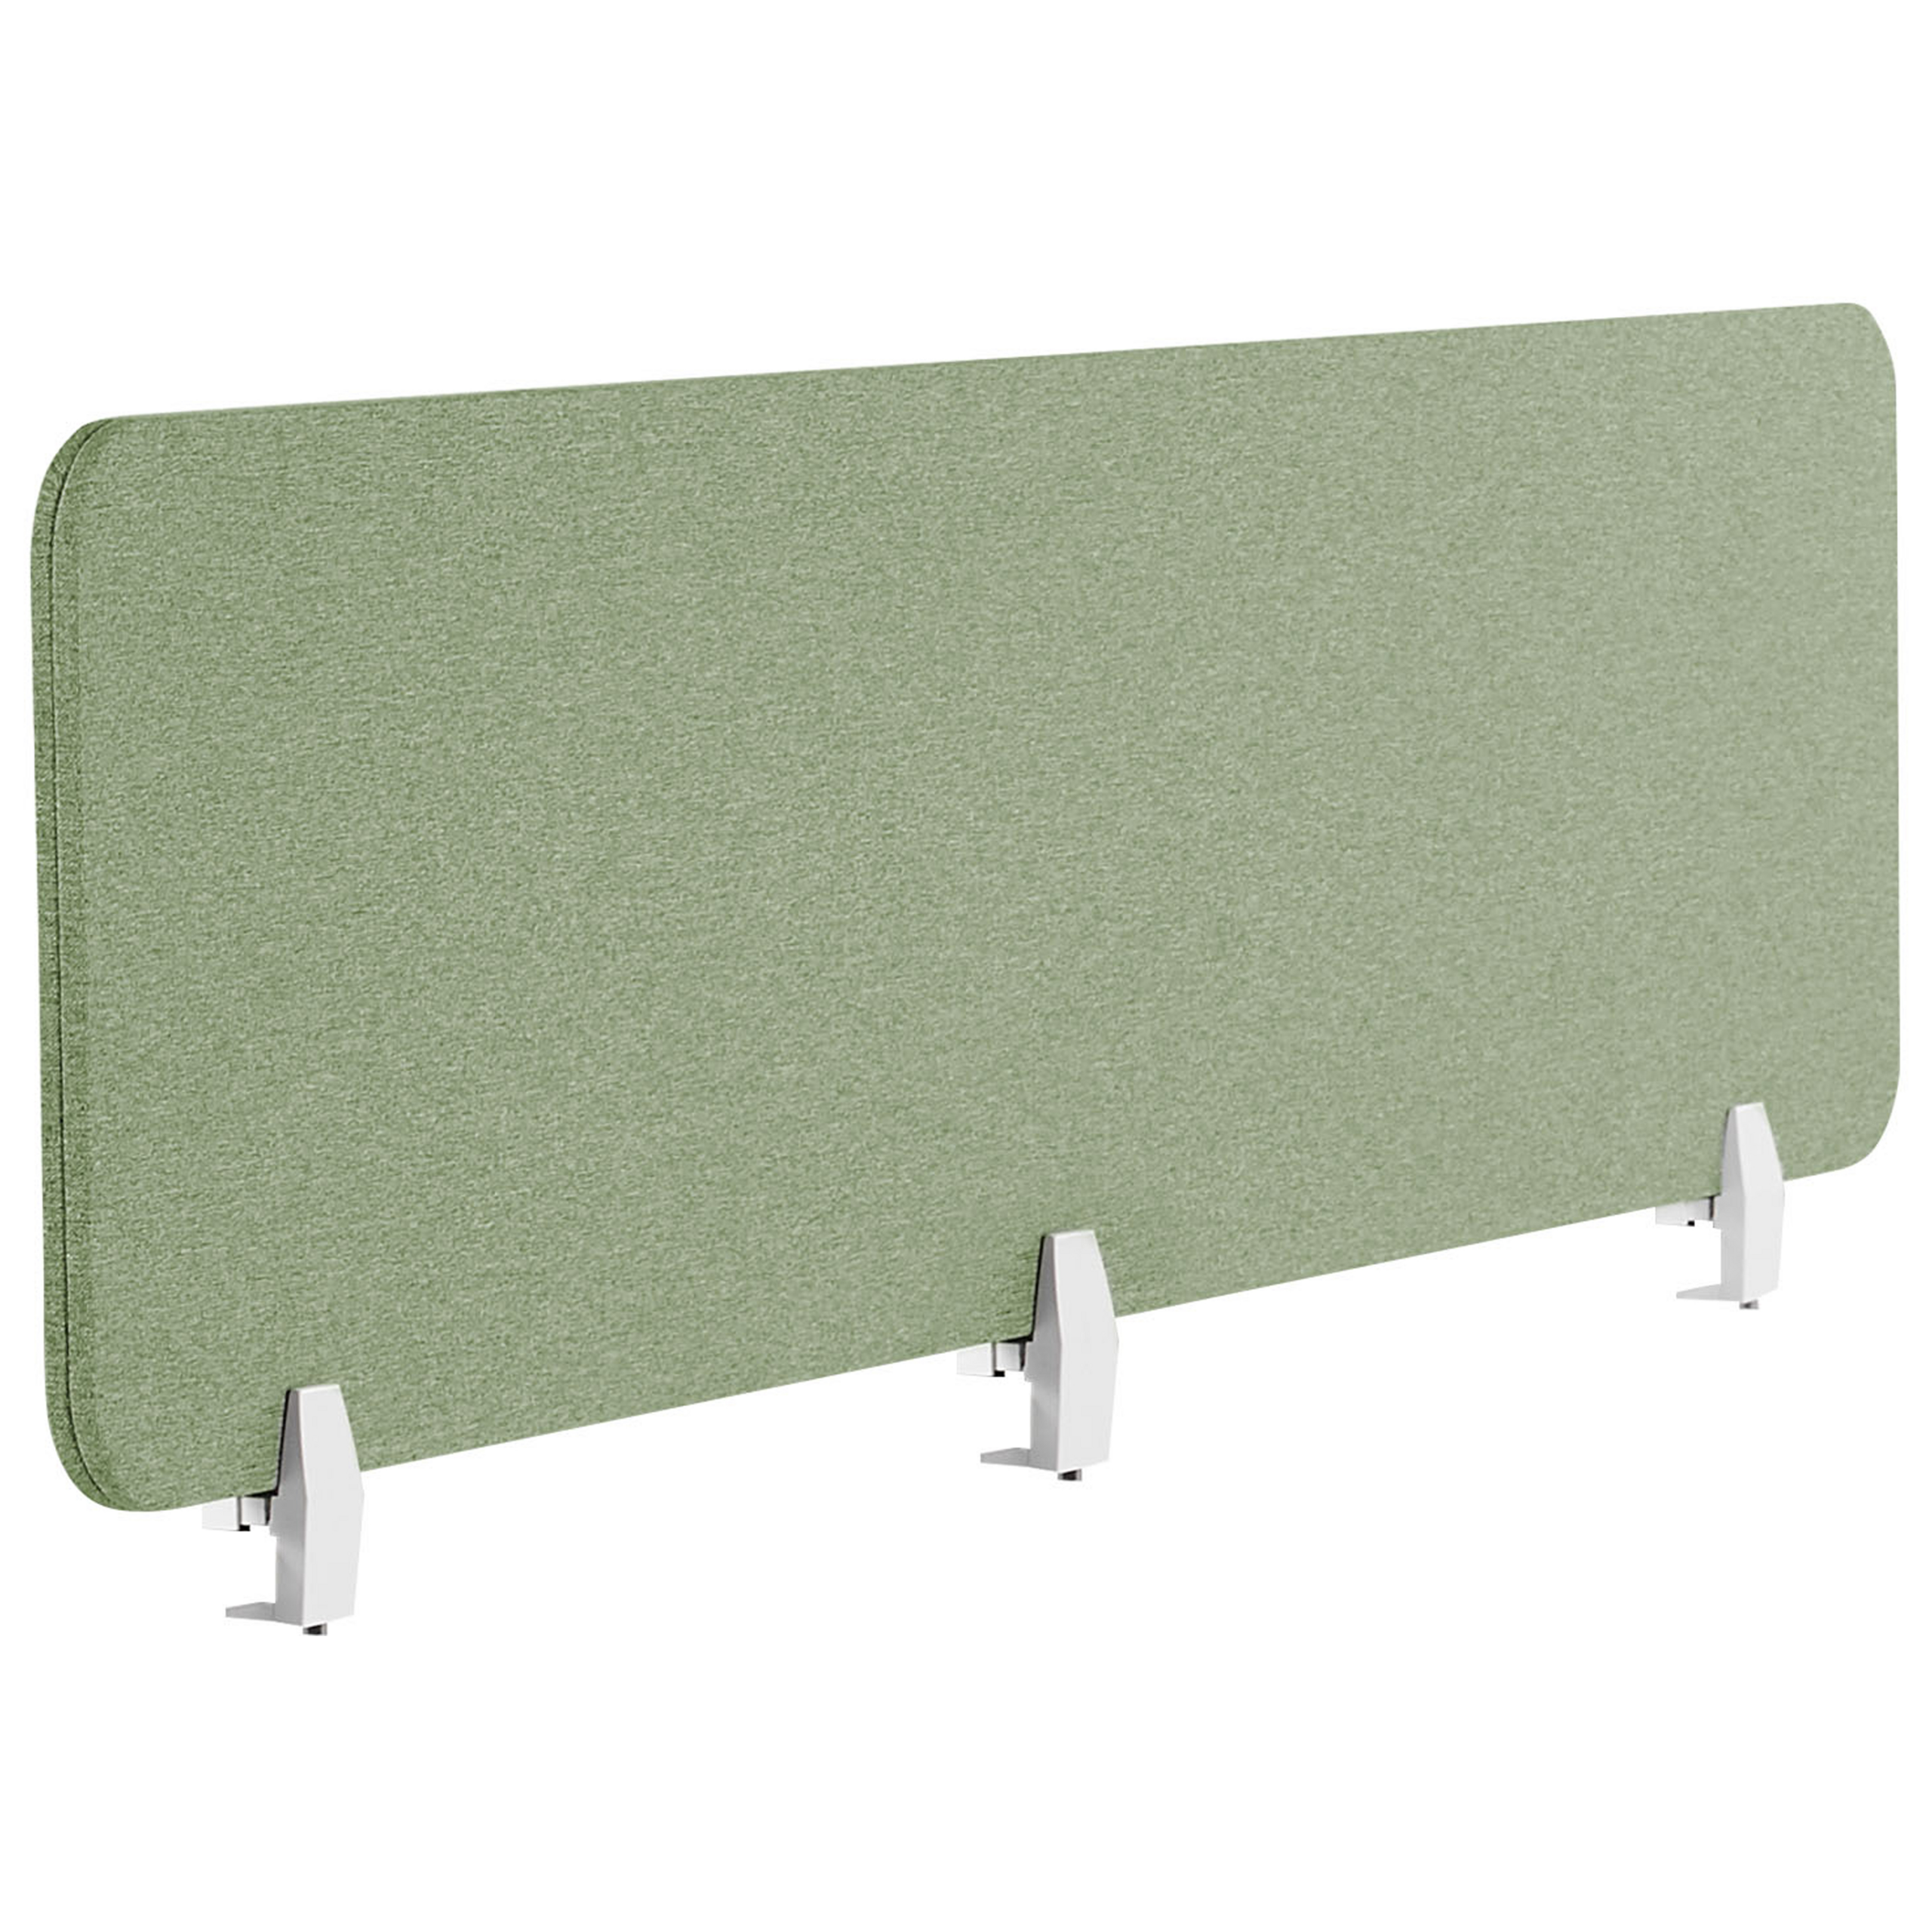 Beliani Desk Screen Green PET Board Fabric Cover 180 x 40 cm Acoustic Screen Modular Mounting Clamps Home Office Material:Polyester Size:2x40x180